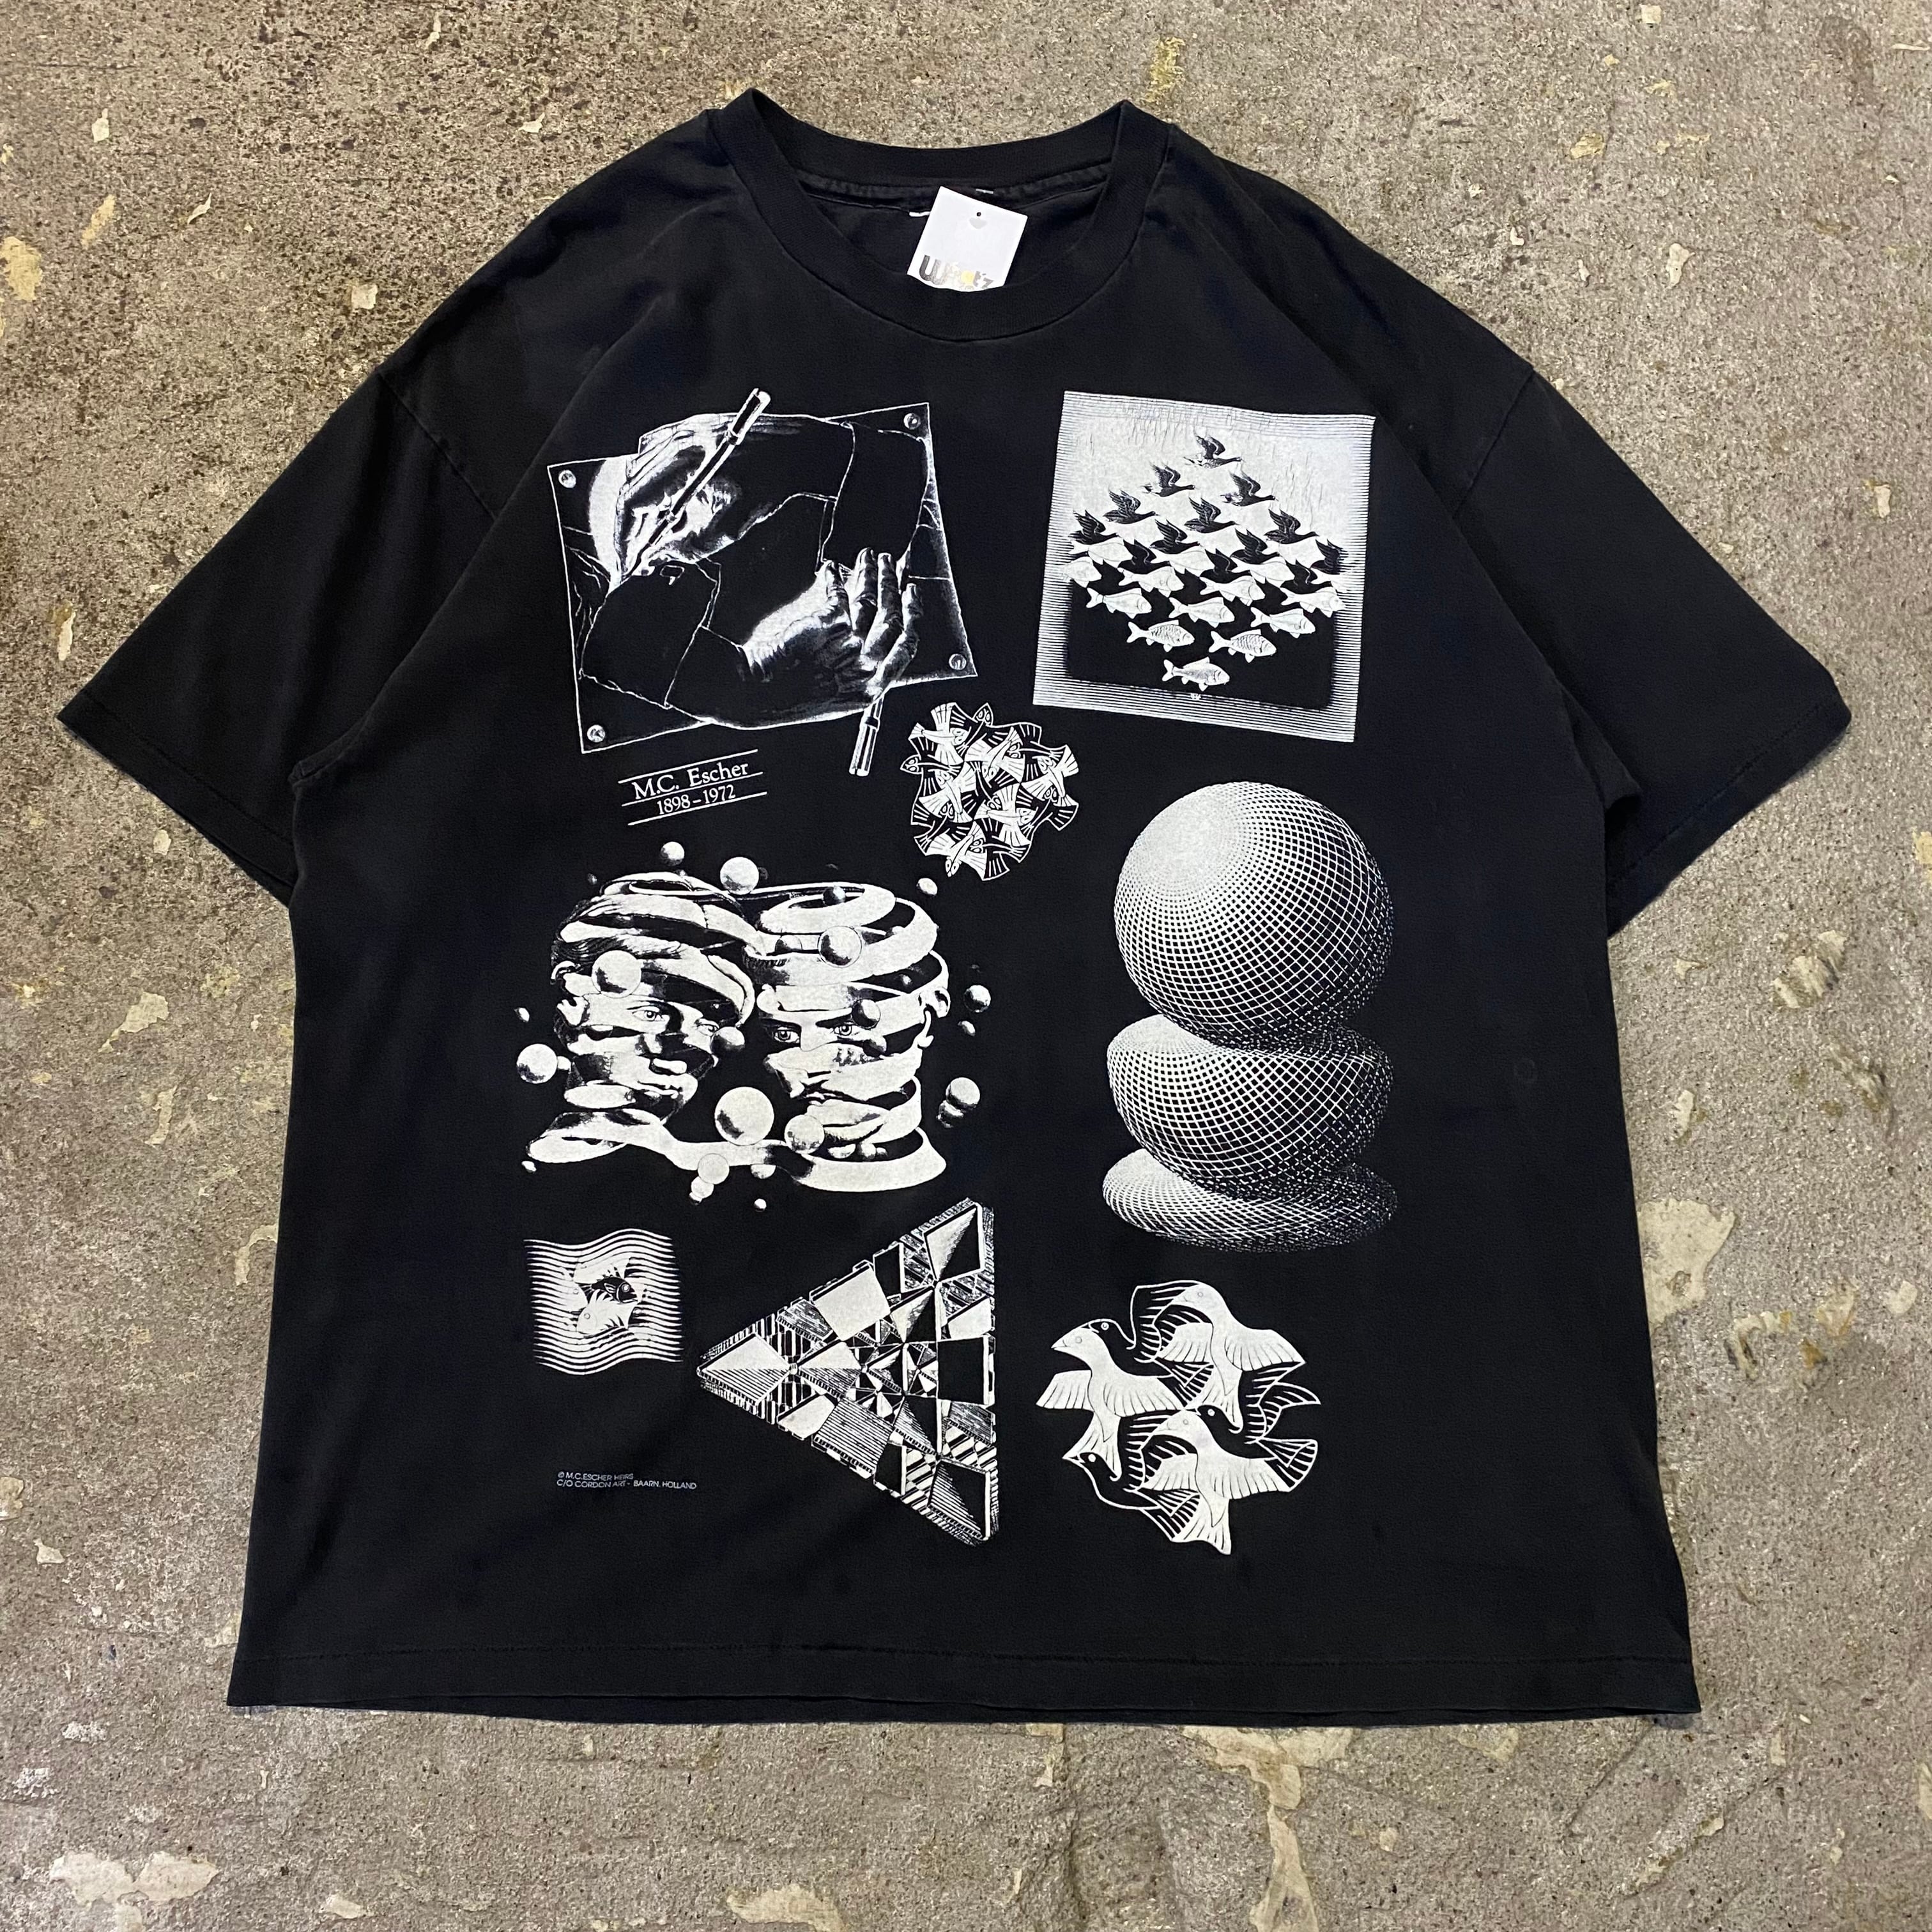 NEW限定品】 90s ヴィンテージM.C ESCHER エッシャー シングルステッチ ...